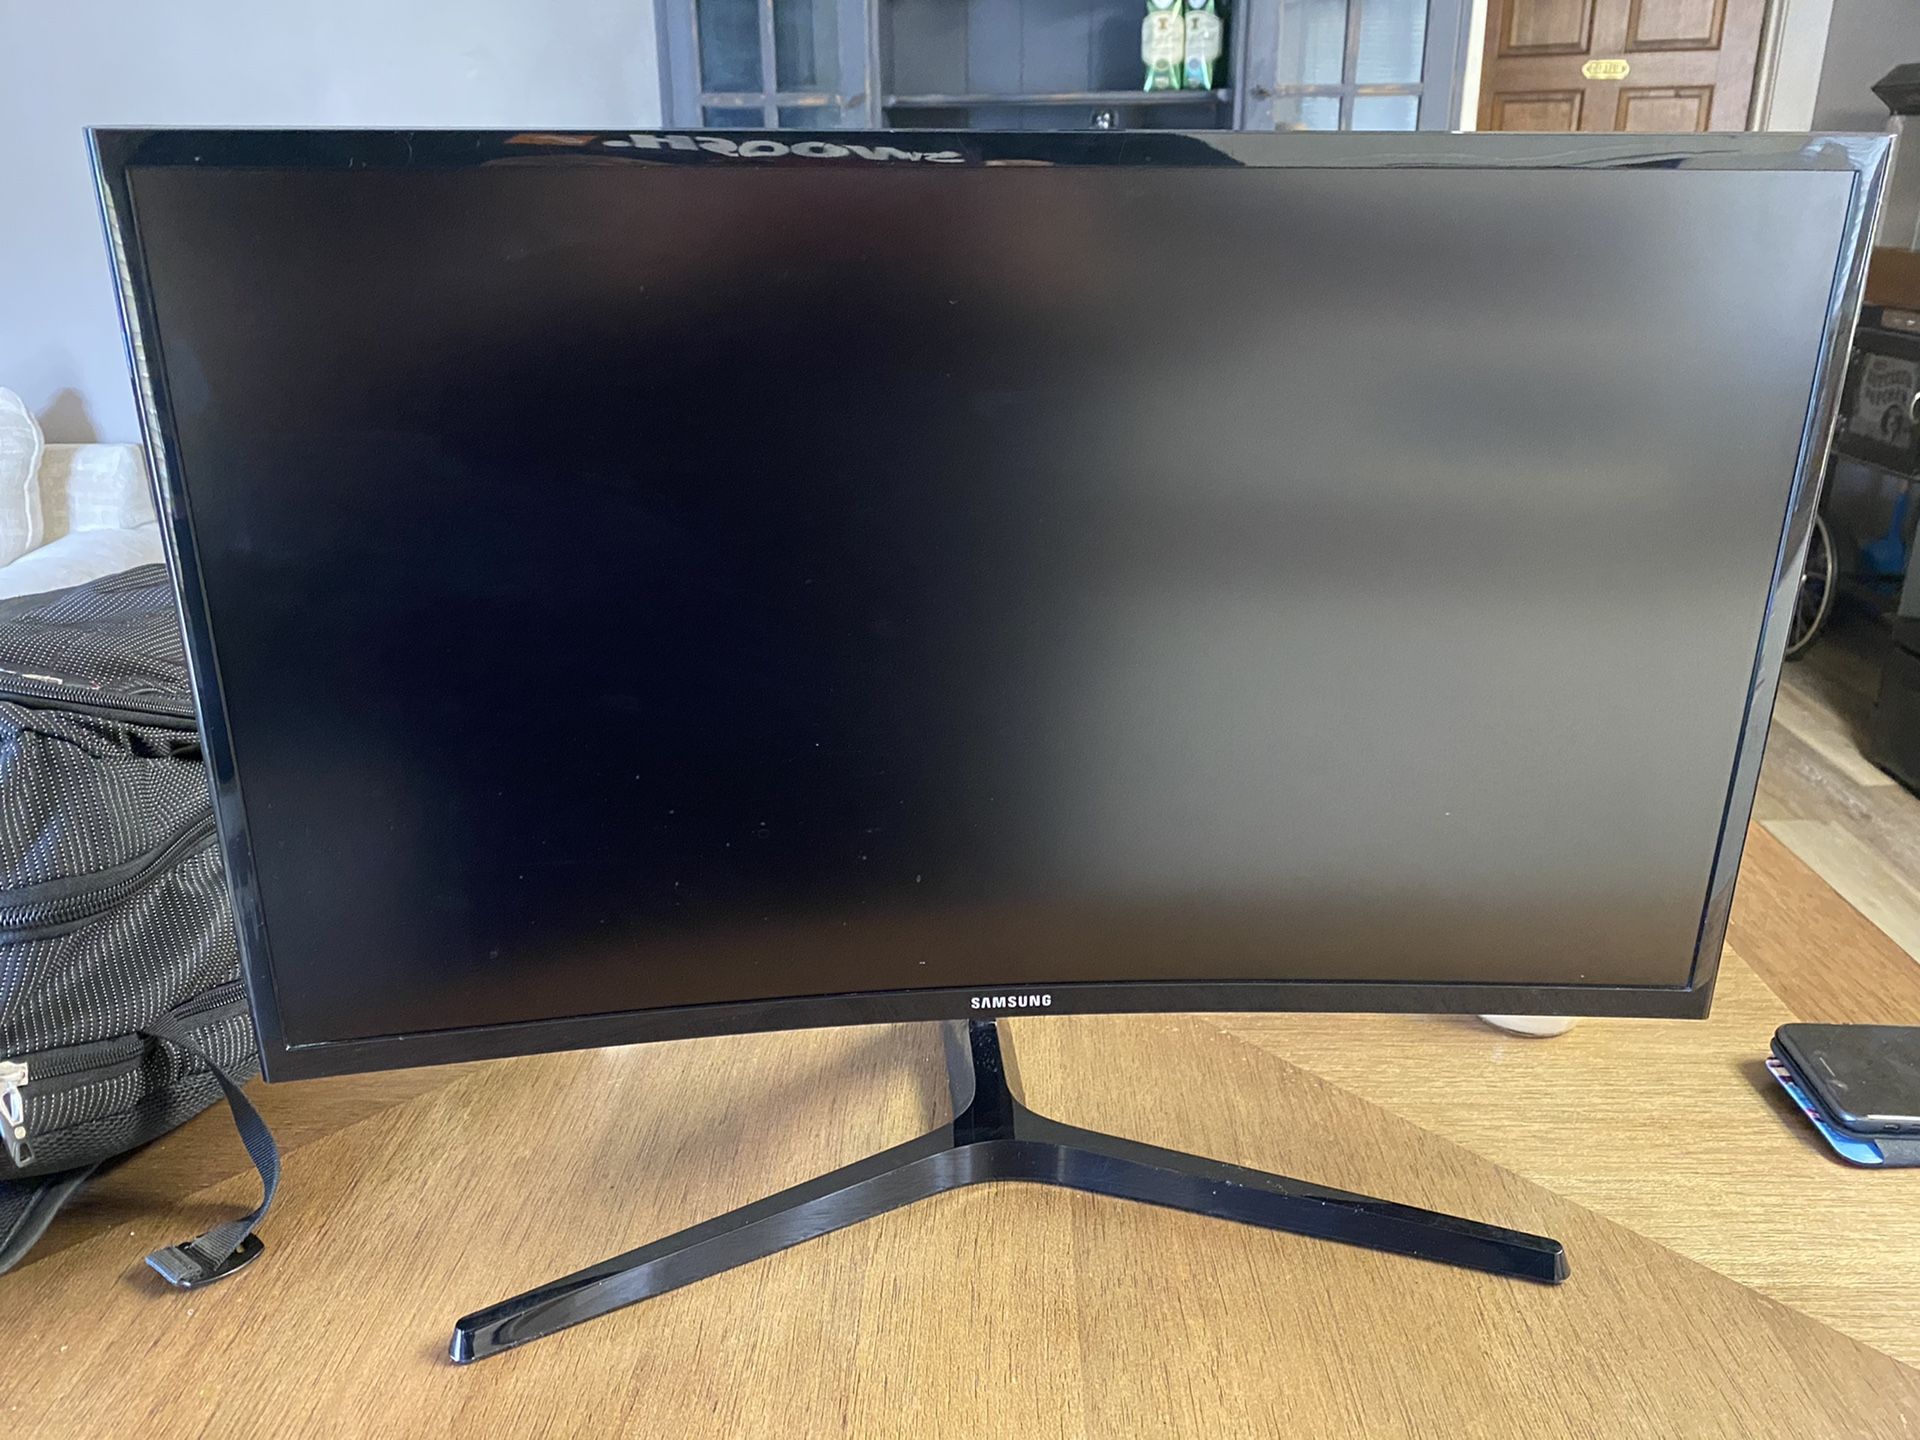 Samsung 27” curved monitor